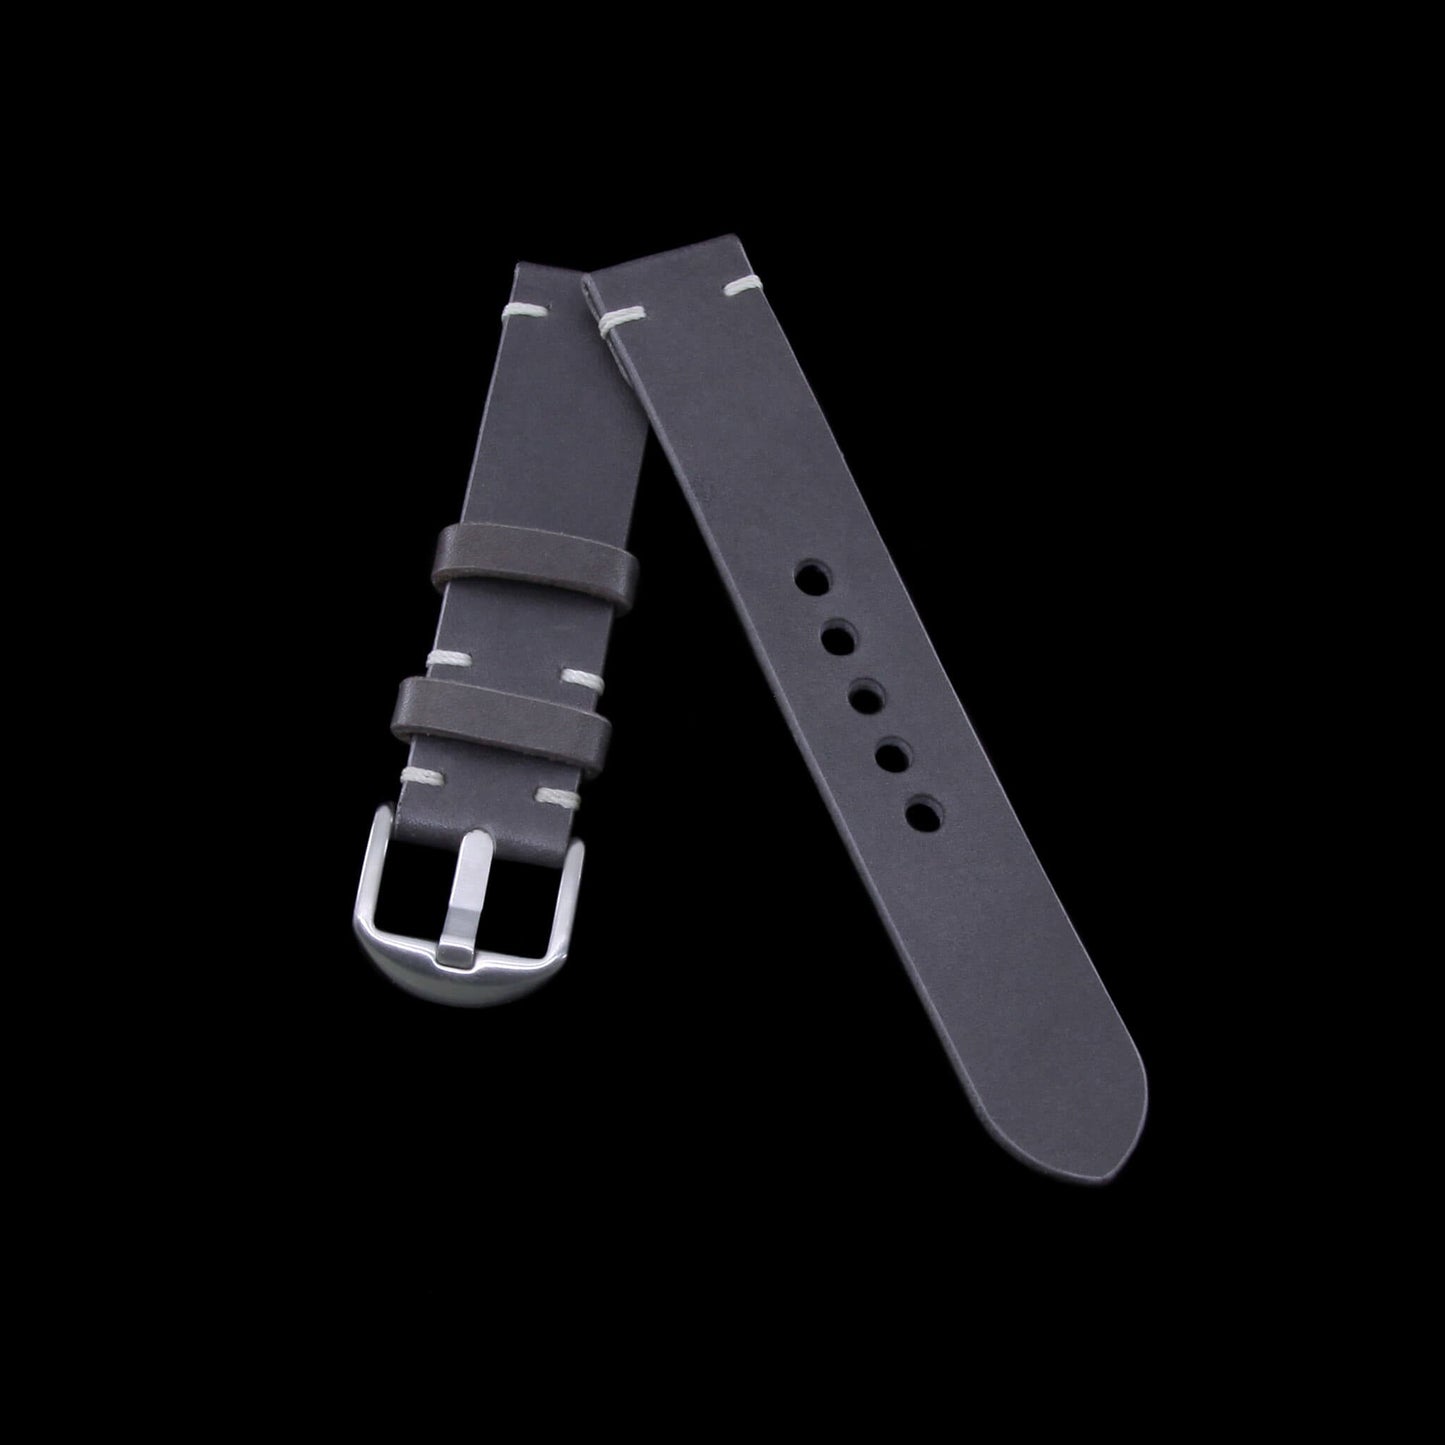 Cozy Handmade's 2-Piece Minimalist: Premium gray leather Apple Watch strap, handcrafted for everyday comfort and style.